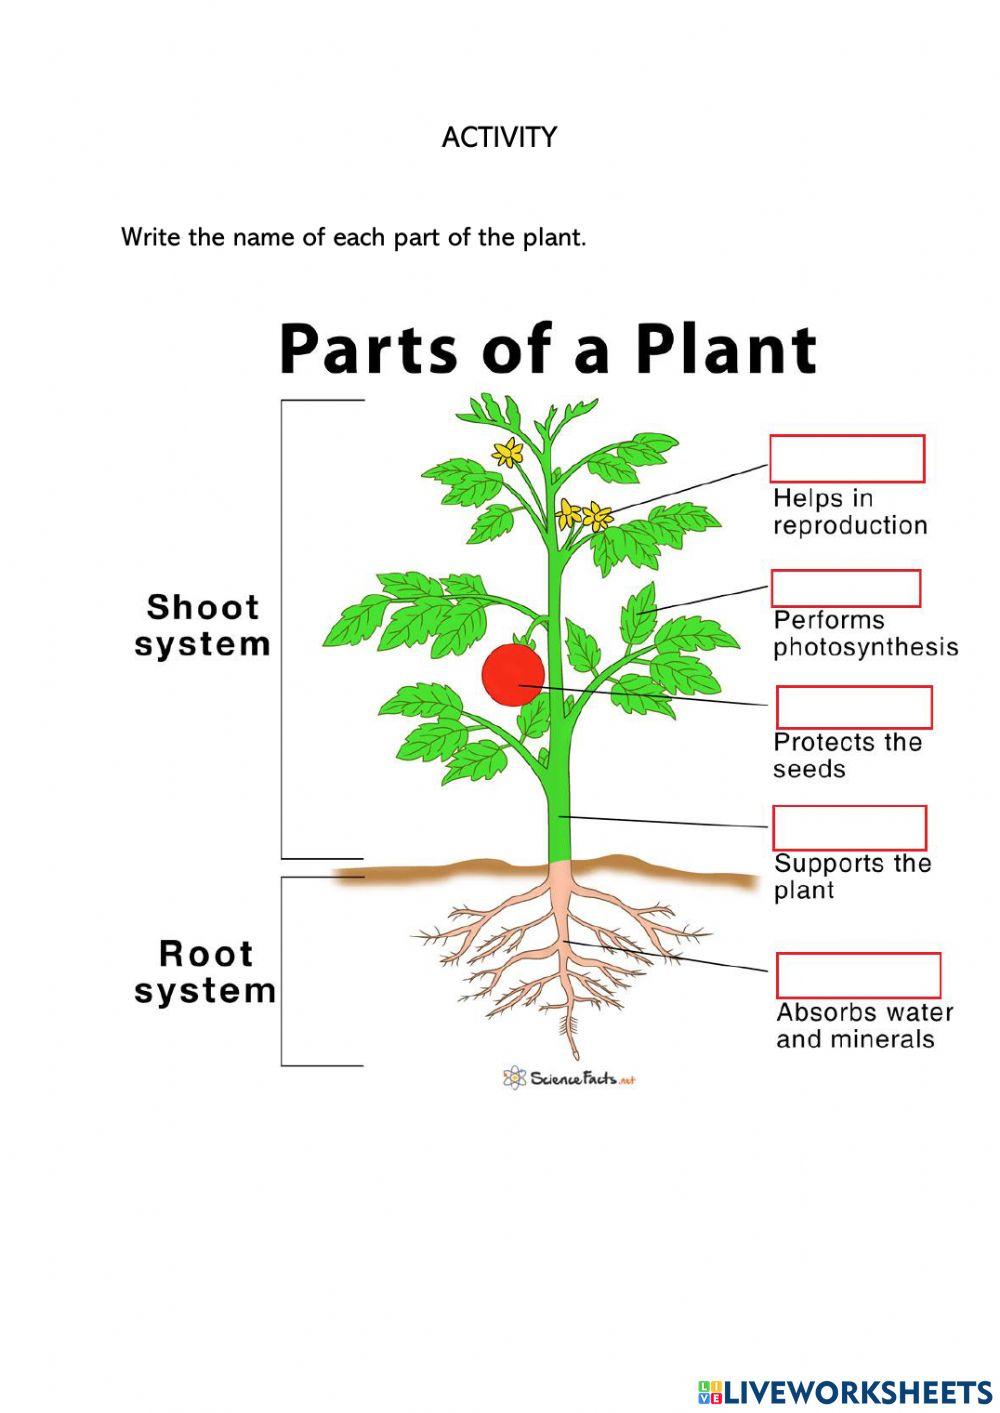 Parts of the plant